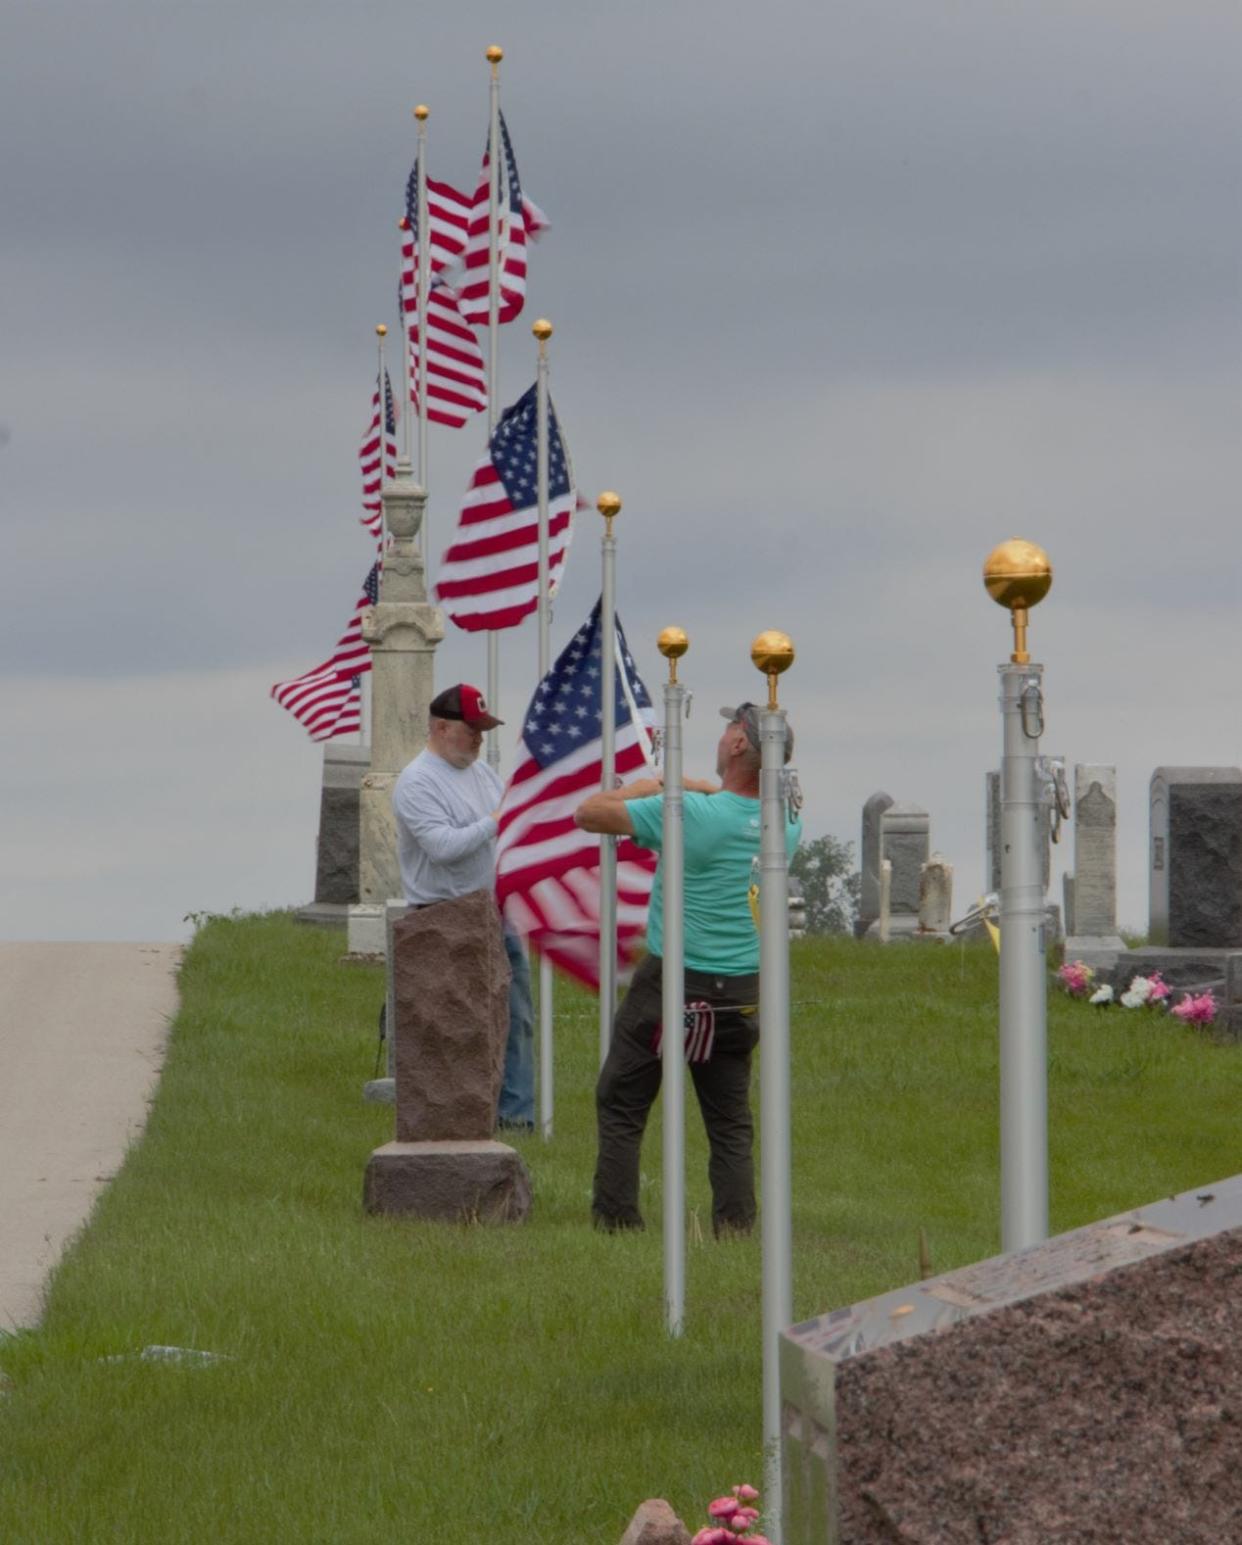 Jim McCormick on the left and Galen Stole raise flags at the Roland cemetery prior to a Memorial Day event there in 2021.